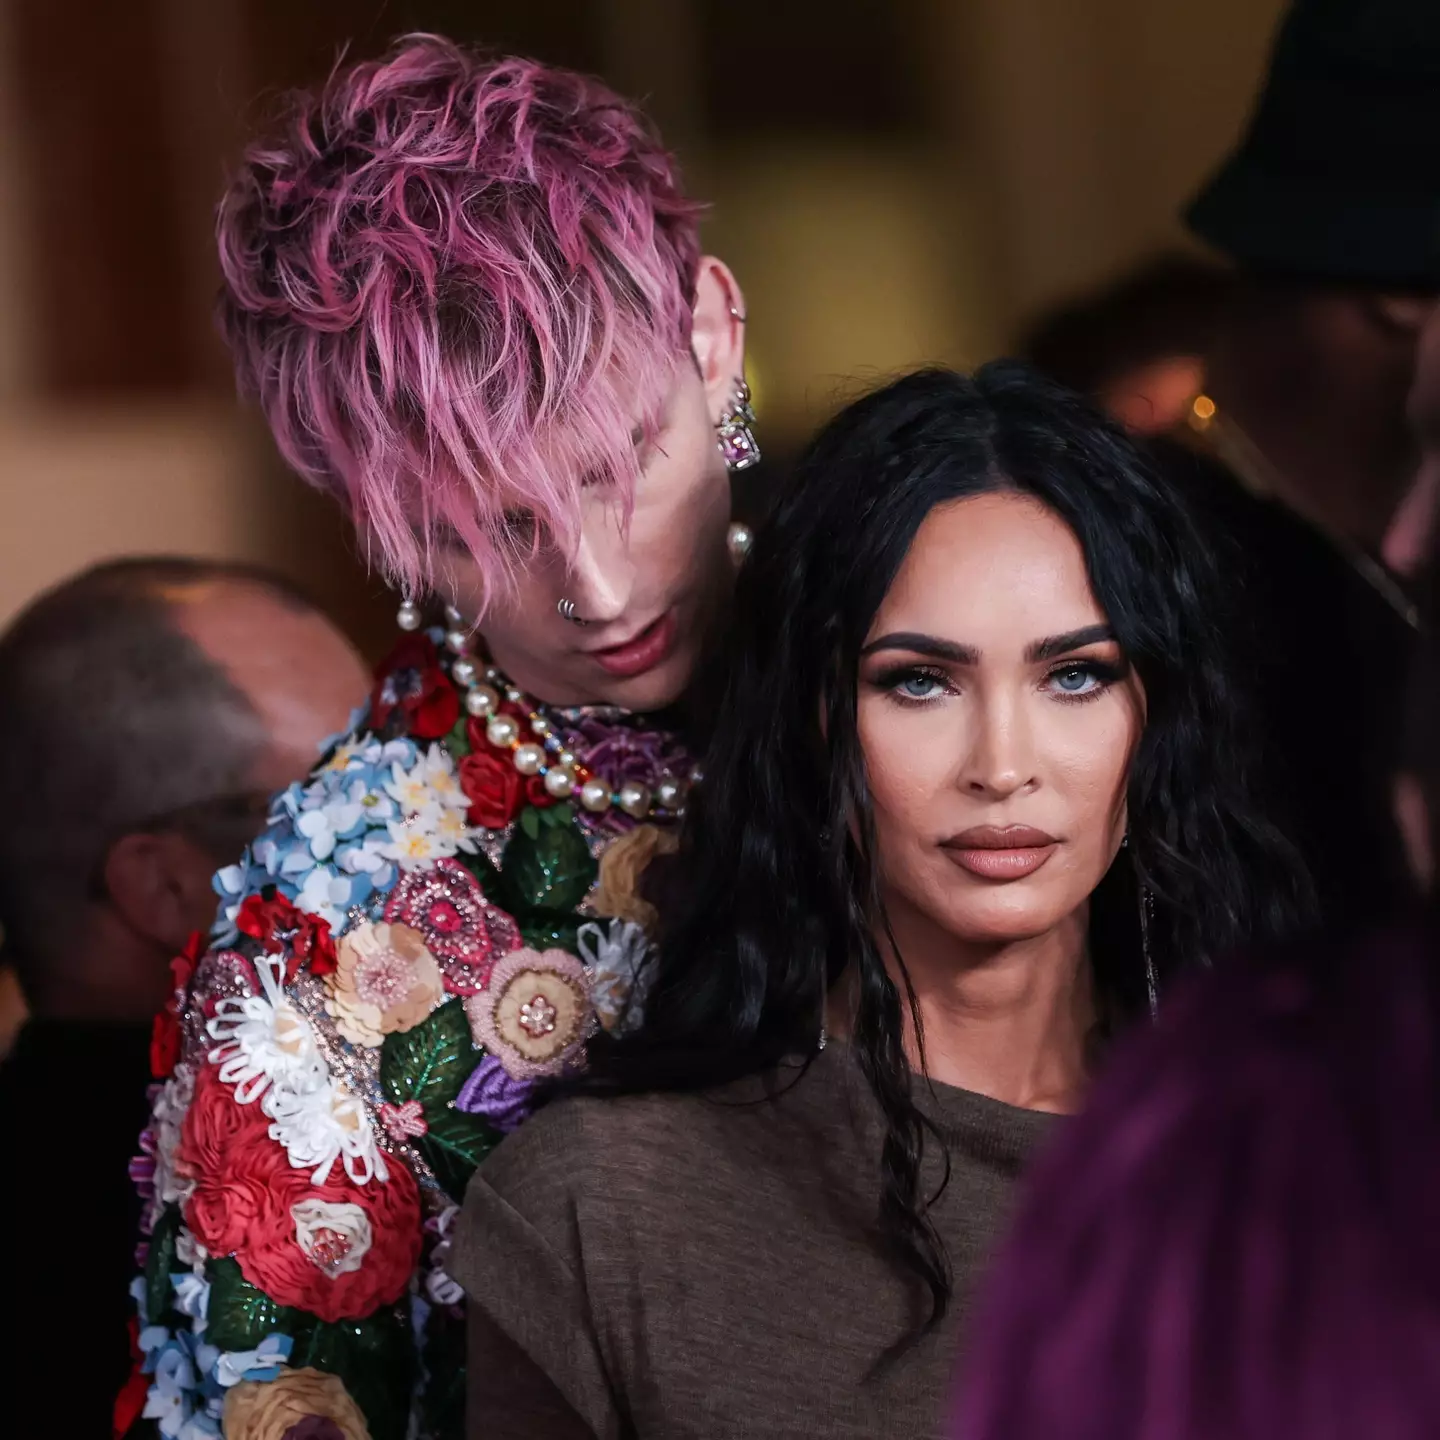 Fans of Machine Gun Kelly and Megan Fox have been left worried about the pair's relationship after Fox appeared to snub her fiancé.